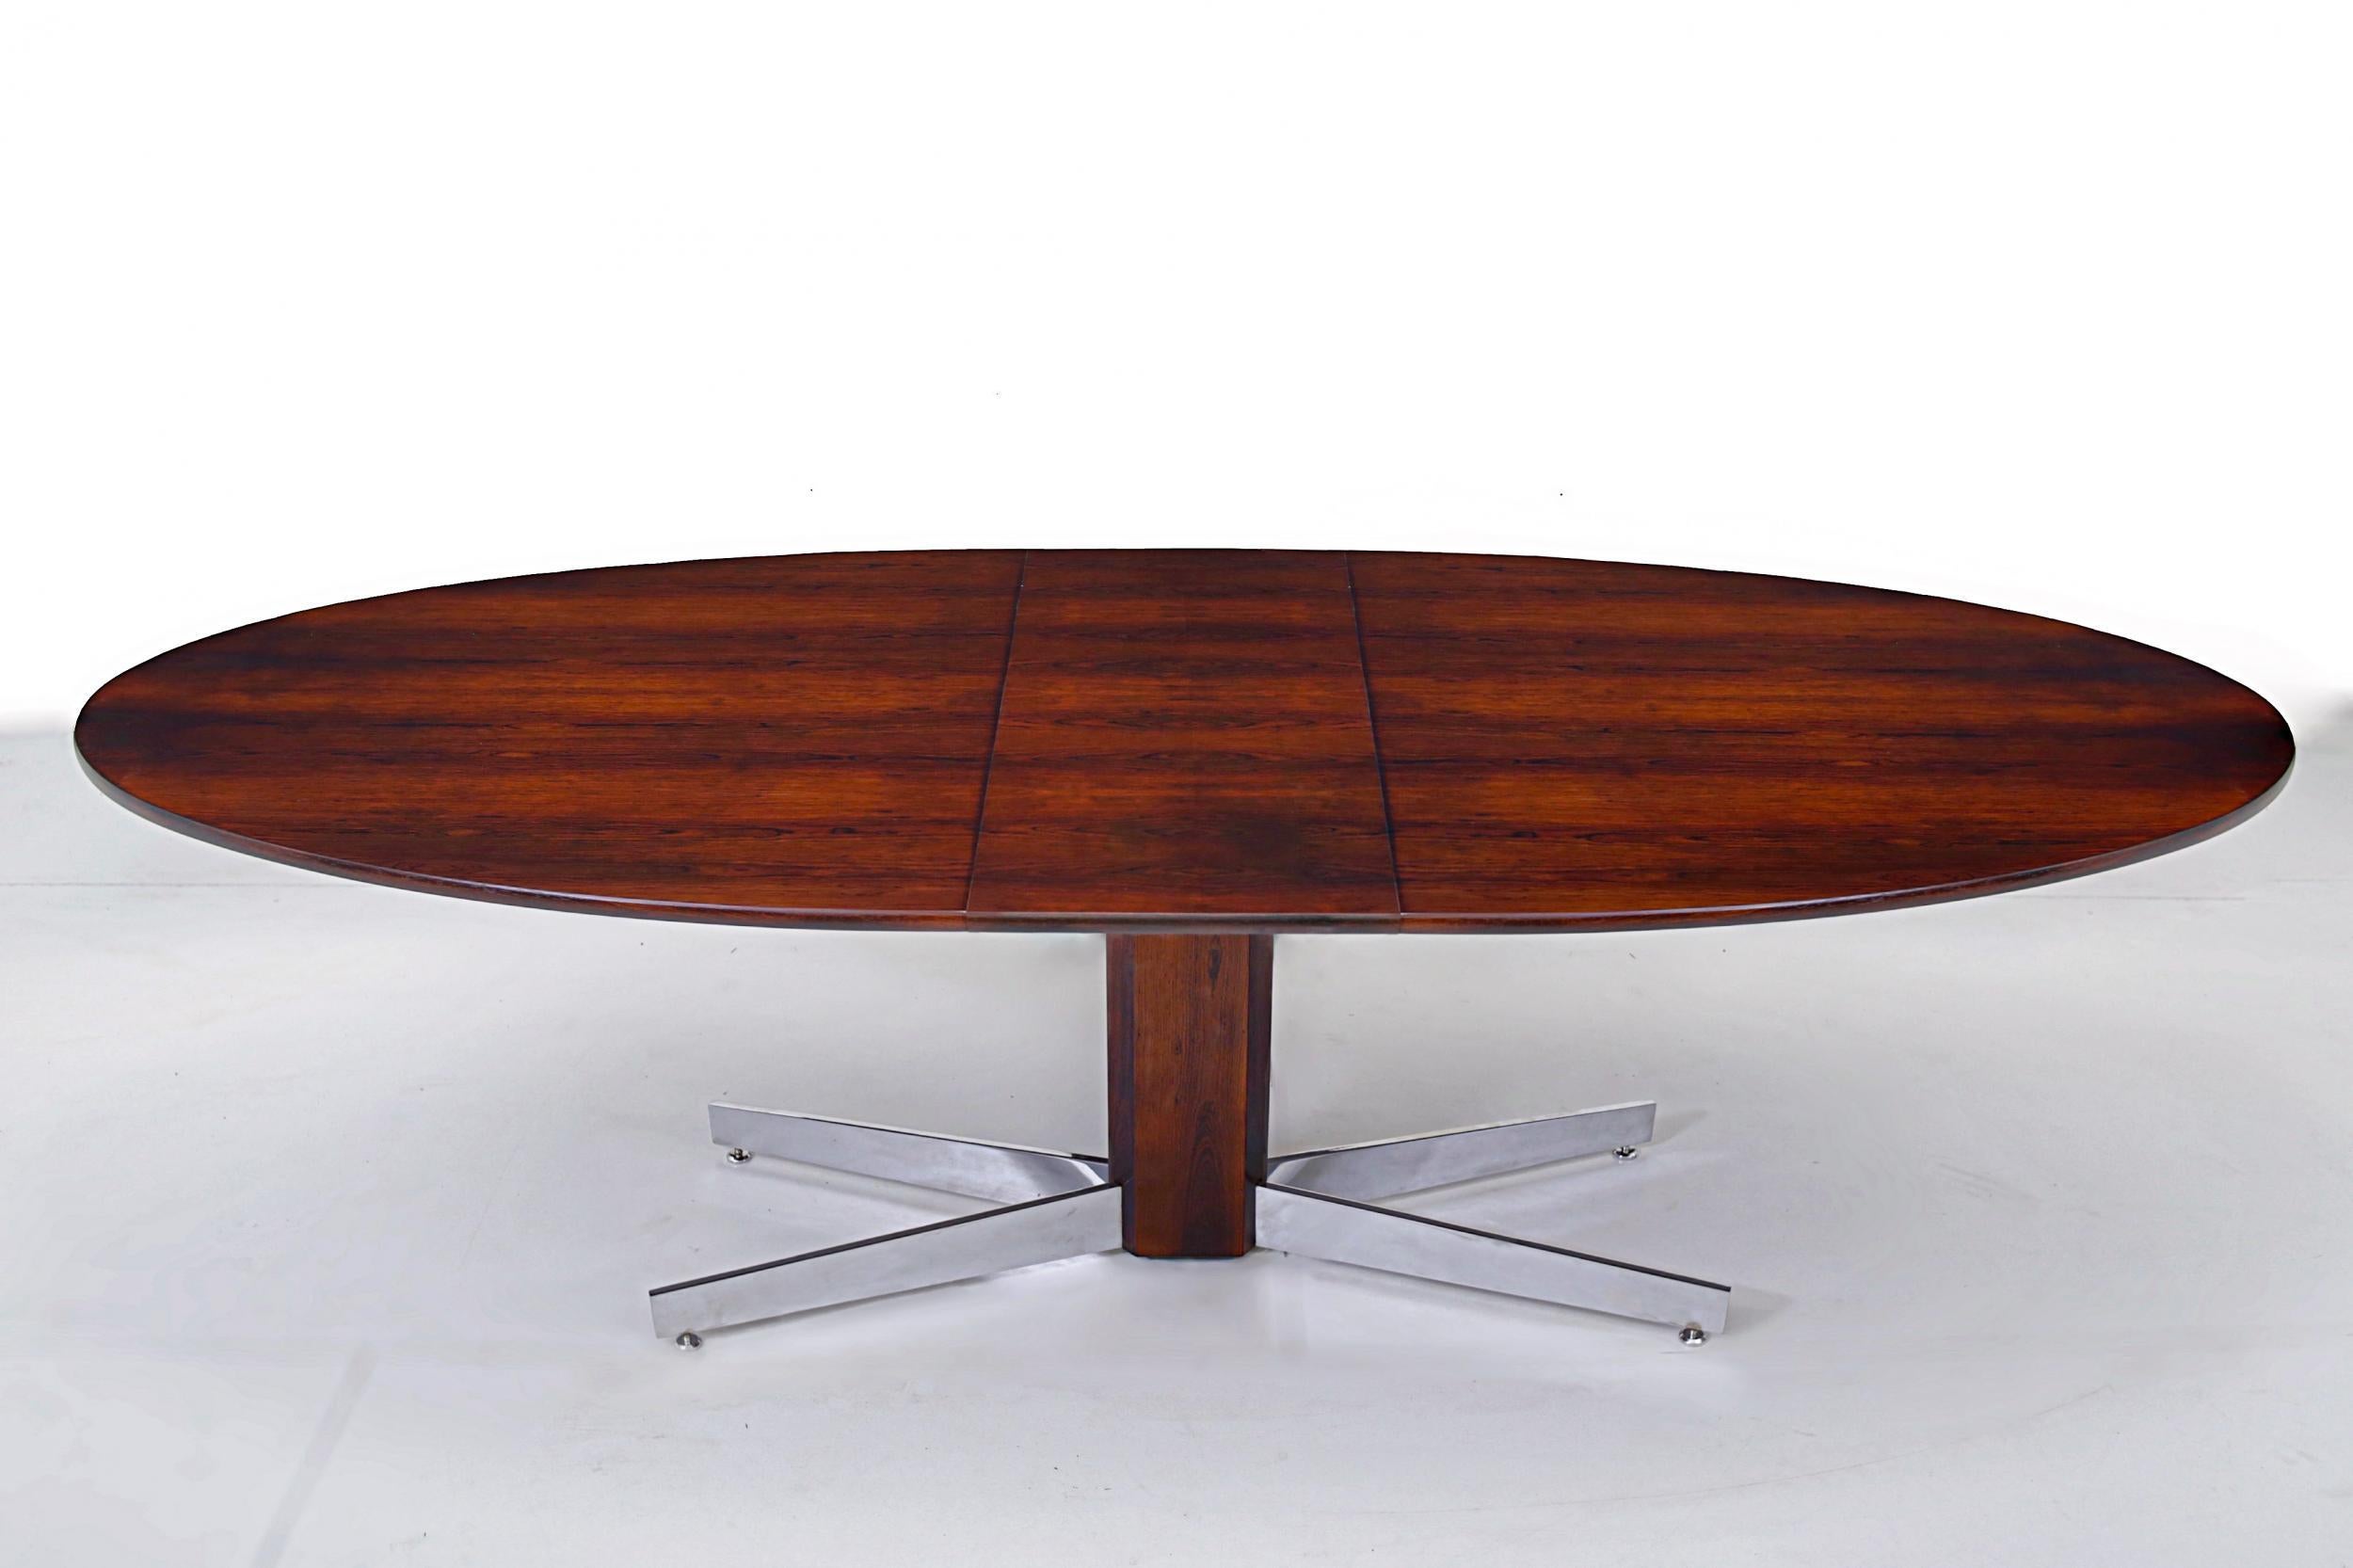 Brazilian rosewood dining table with stored leaf on chrome pedestal base. Designed by Jorge Zalszupin for L'Atelier. Brazil, 1960. Fully restored/refinished. Top measures: 95